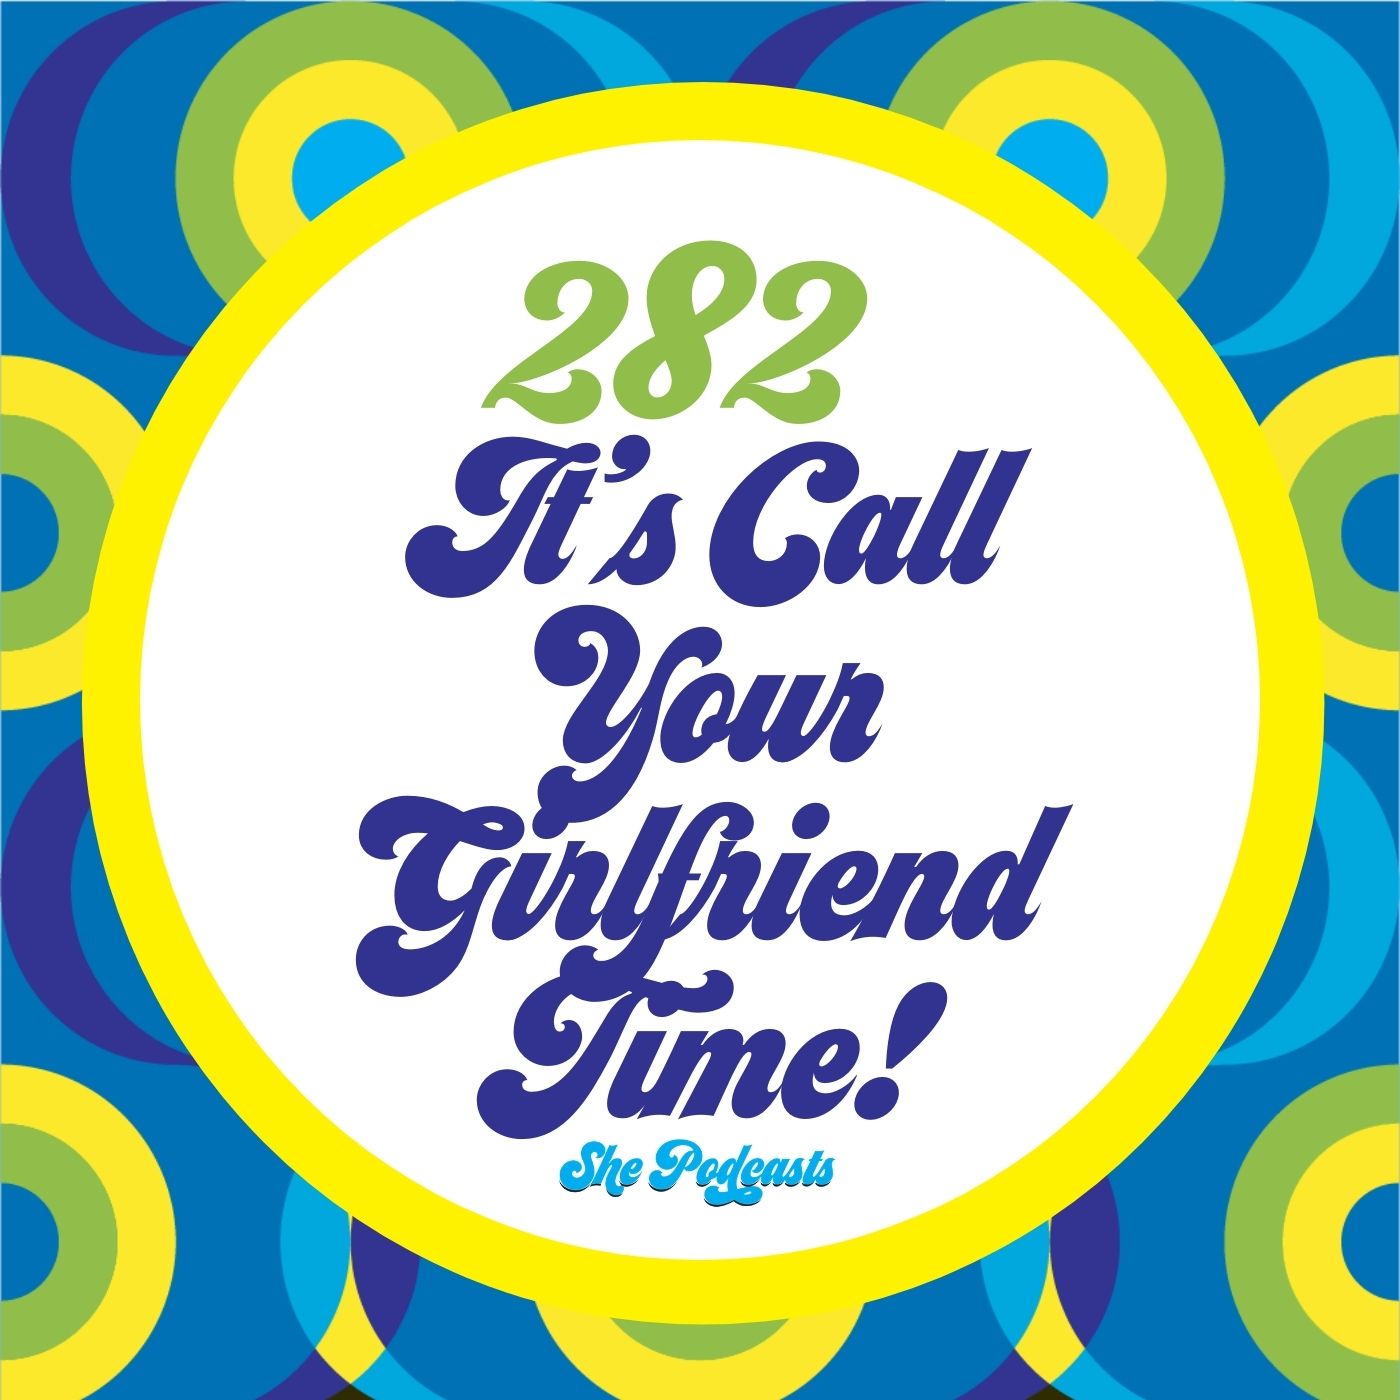 282 It’s Call Your Girlfriend Time!